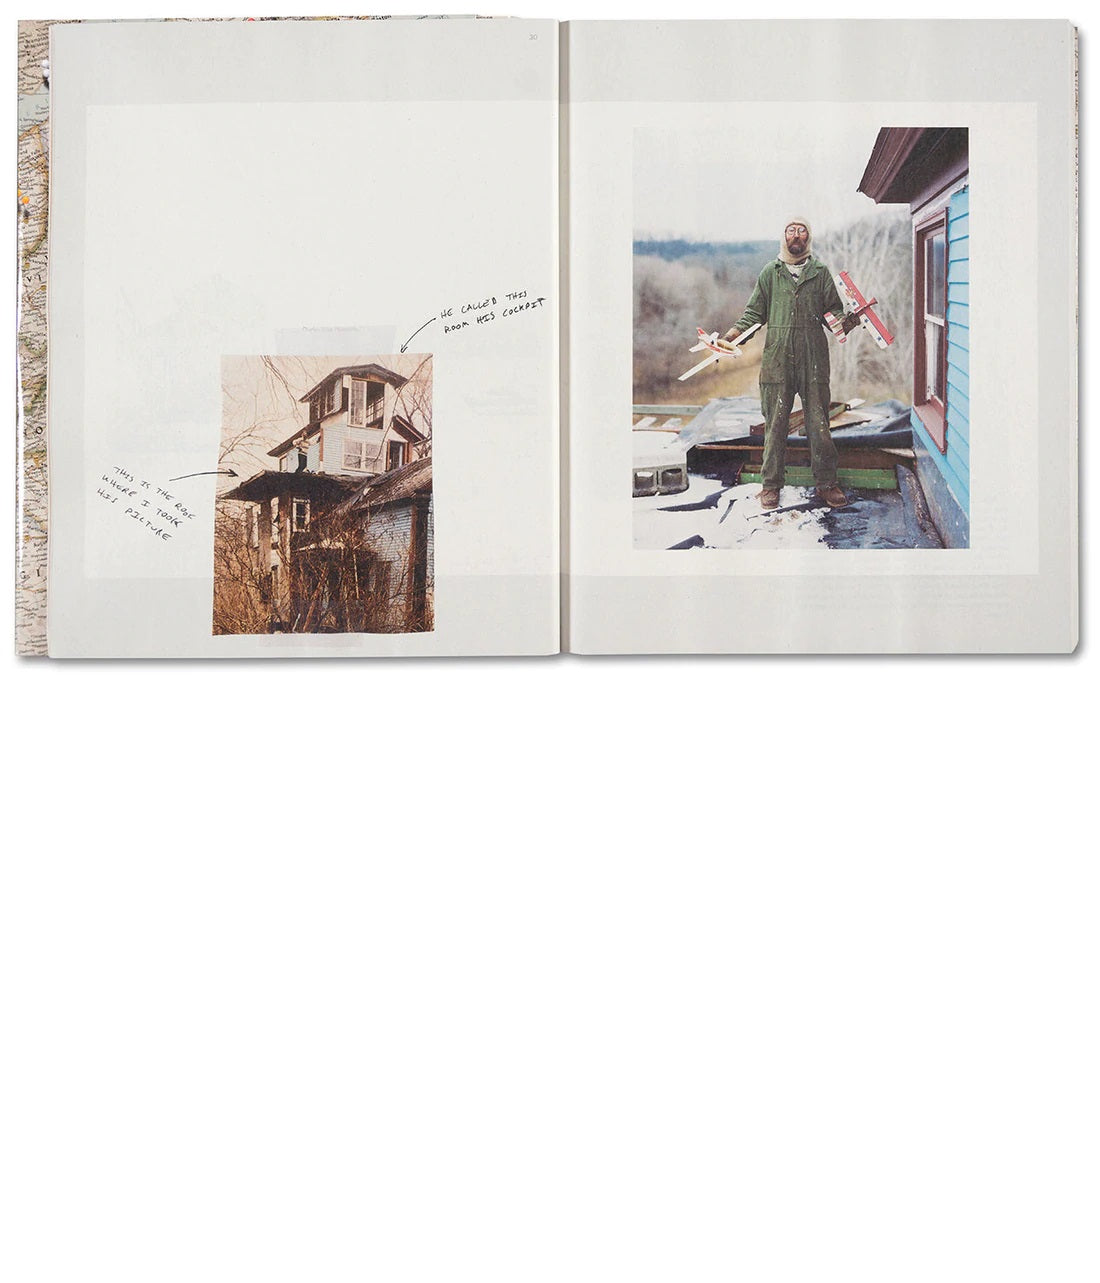 Alec Soth / Gathered Leaves Annotated